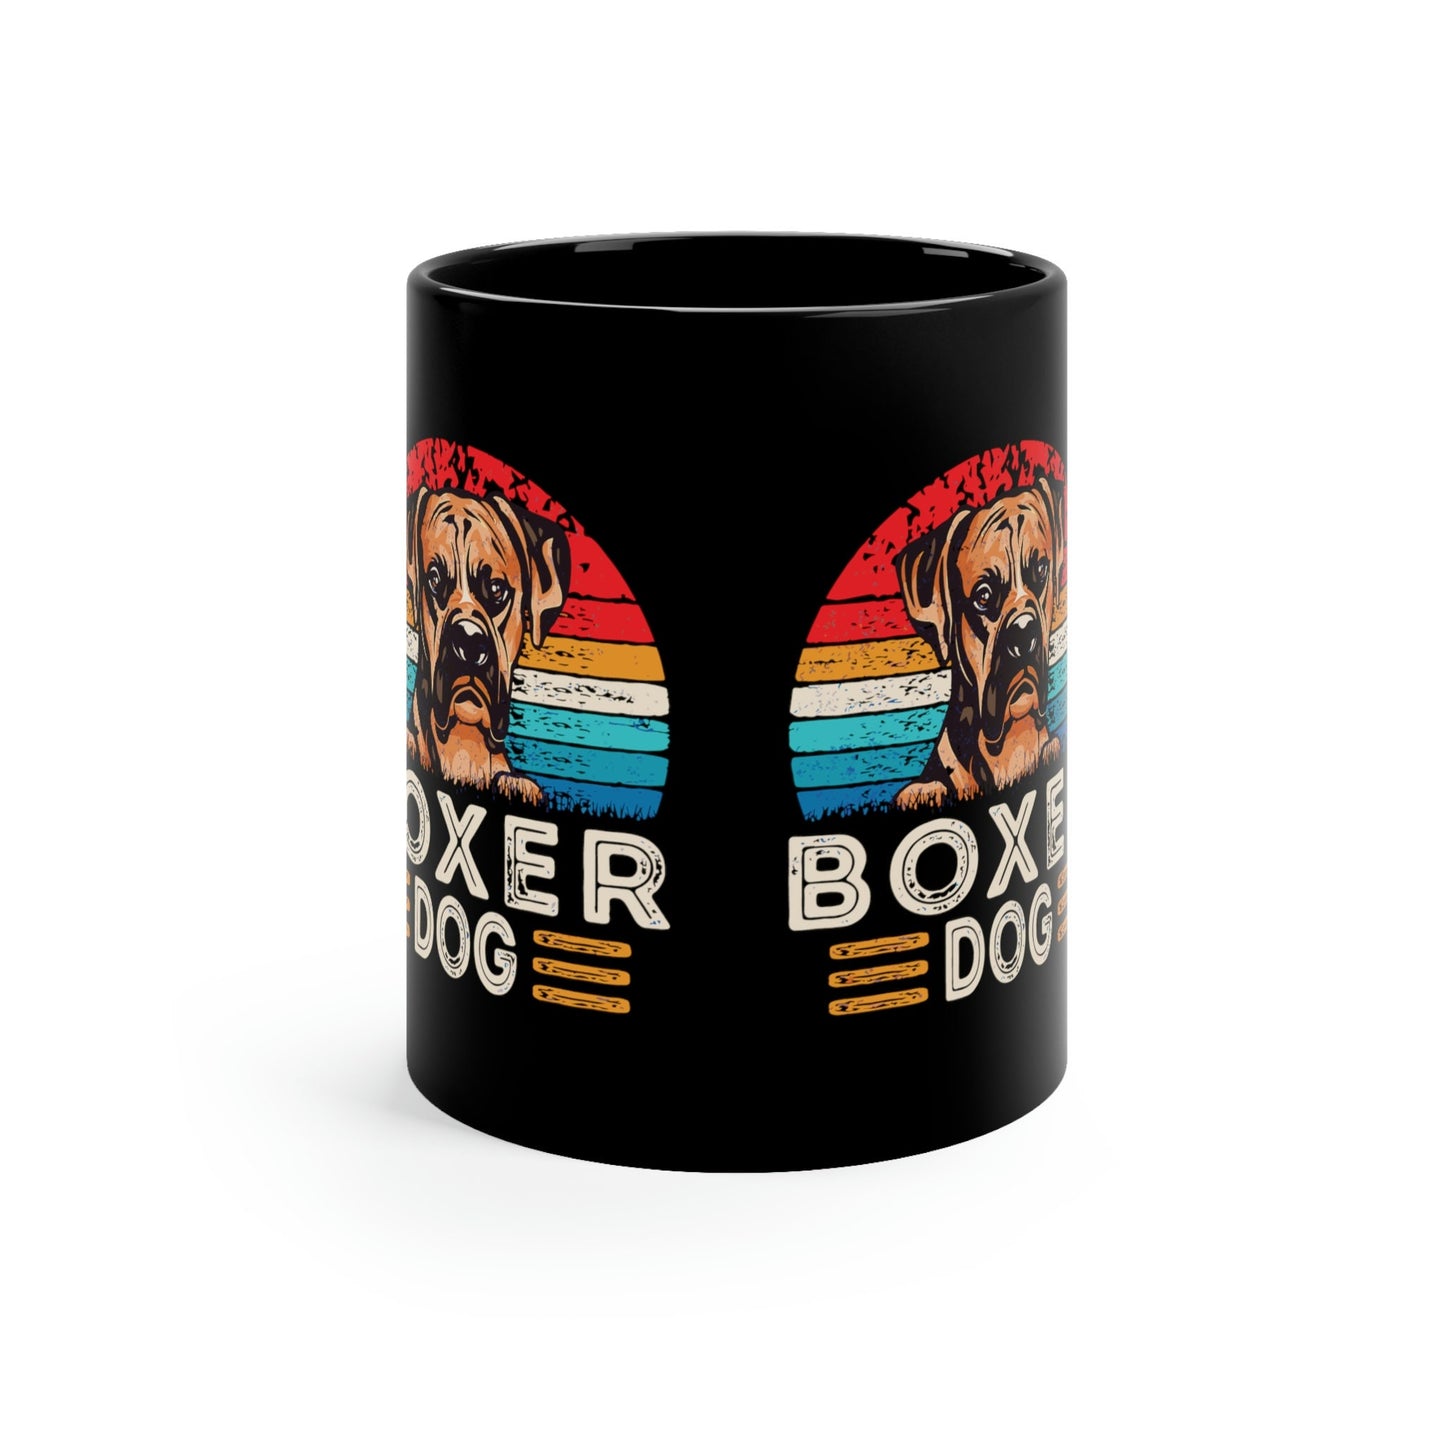 When you are a Boxer Lover, you just know! Black Coffee Mug, 11oz